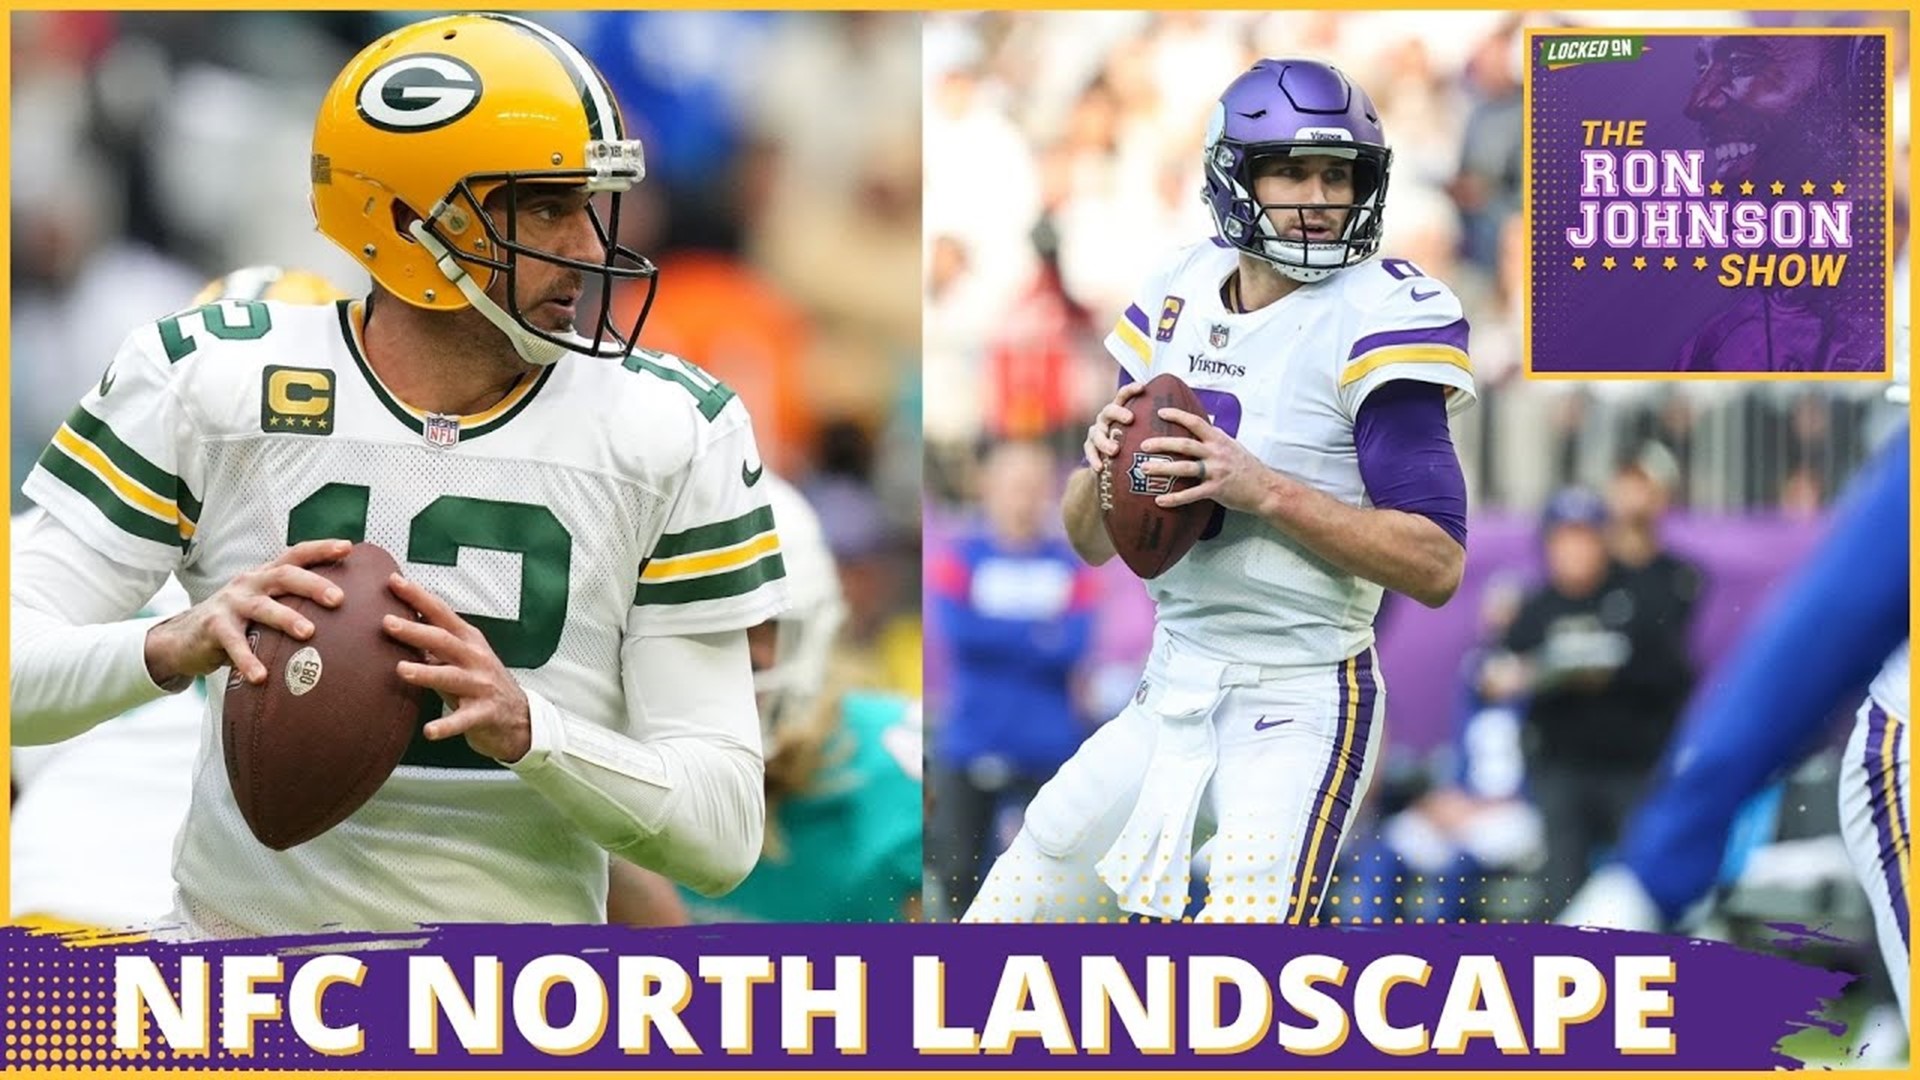 The NFC North landscape could be shifting if Aaron Rodgers is traded. Plus, could Dalvin Cook still be a valuable part of this offense?